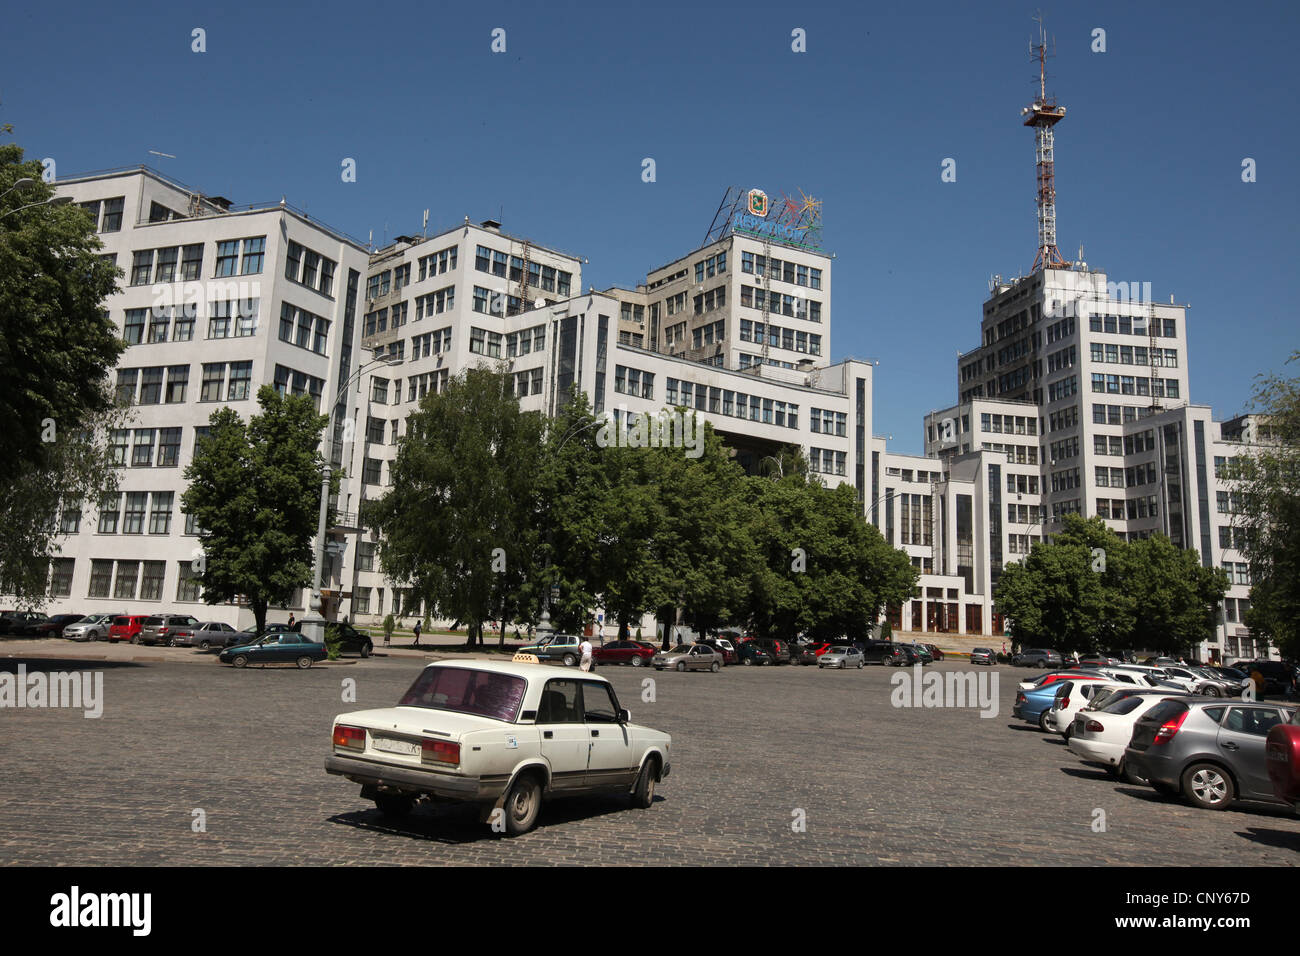 Gosprom (State Industry Building) constructivist building in Freedom Square in Kharkov, Ukraine. Stock Photo